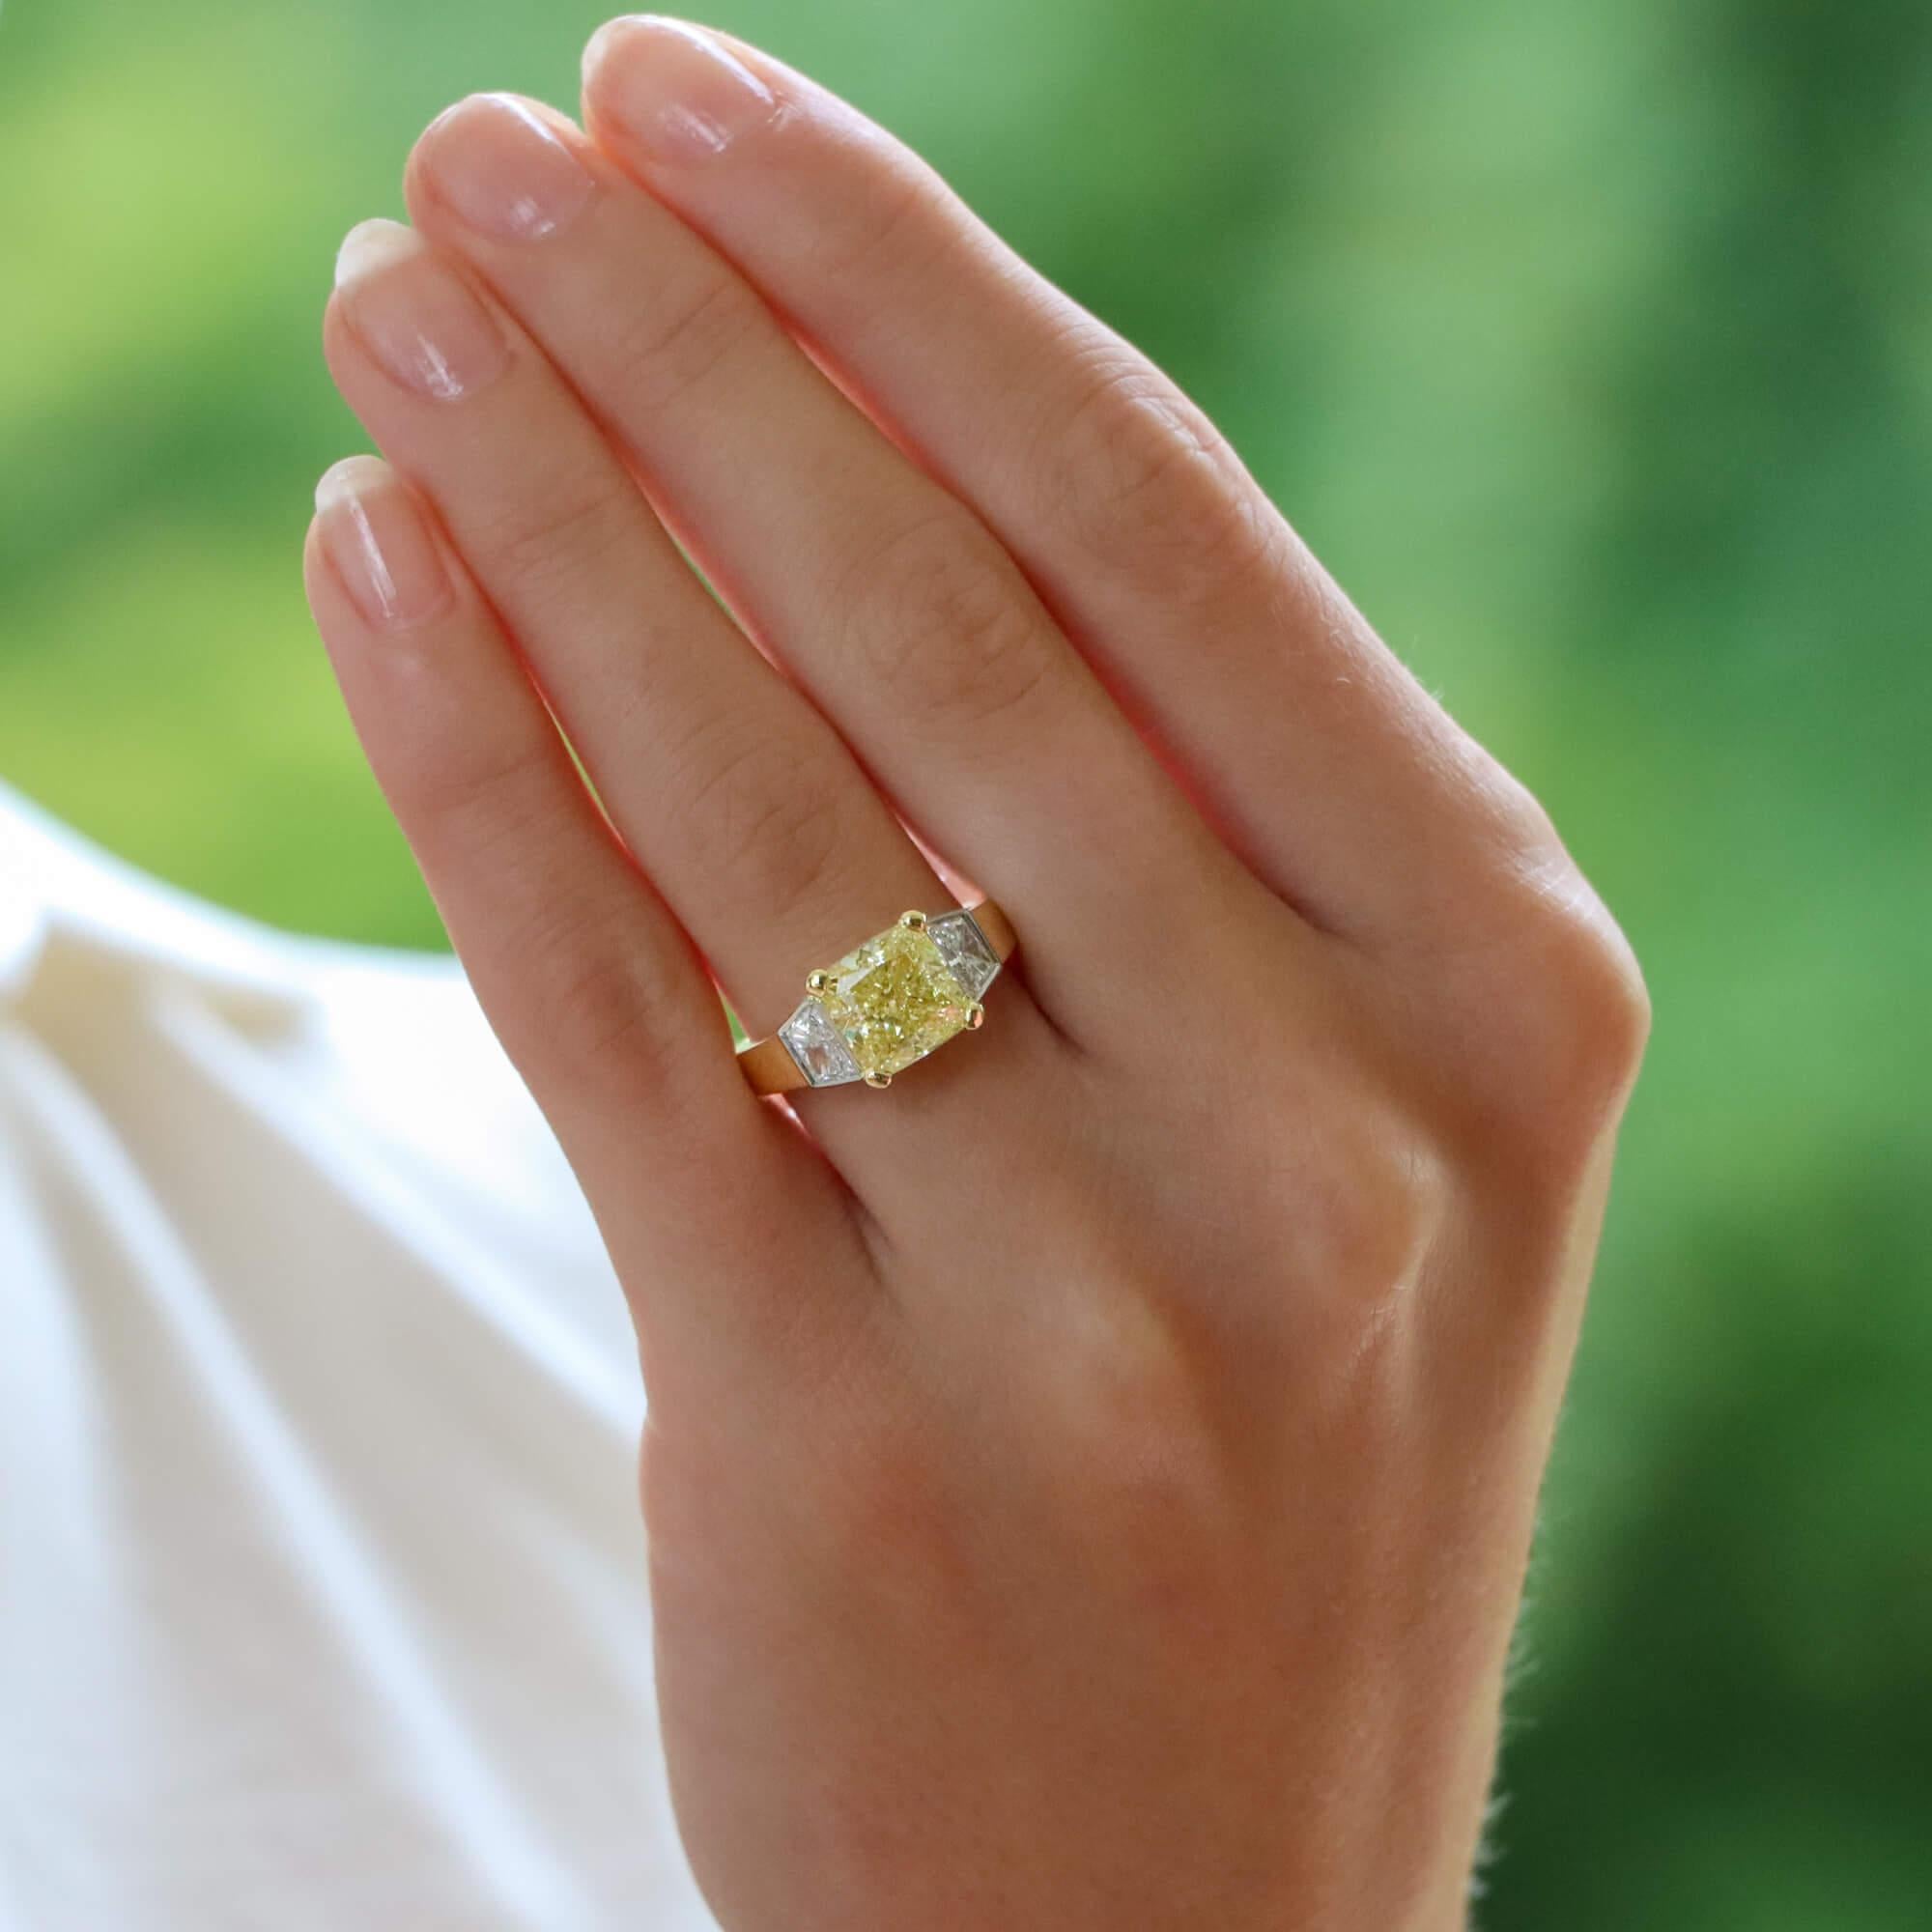 A beautiful GIA certified fancy yellow diamond three stone ring set in 18k yellow and white gold.

The piece is predominantly set with an astounding GIA certified 3.51 carat natural fancy yellow cushion cut diamond which is securely four claw set to